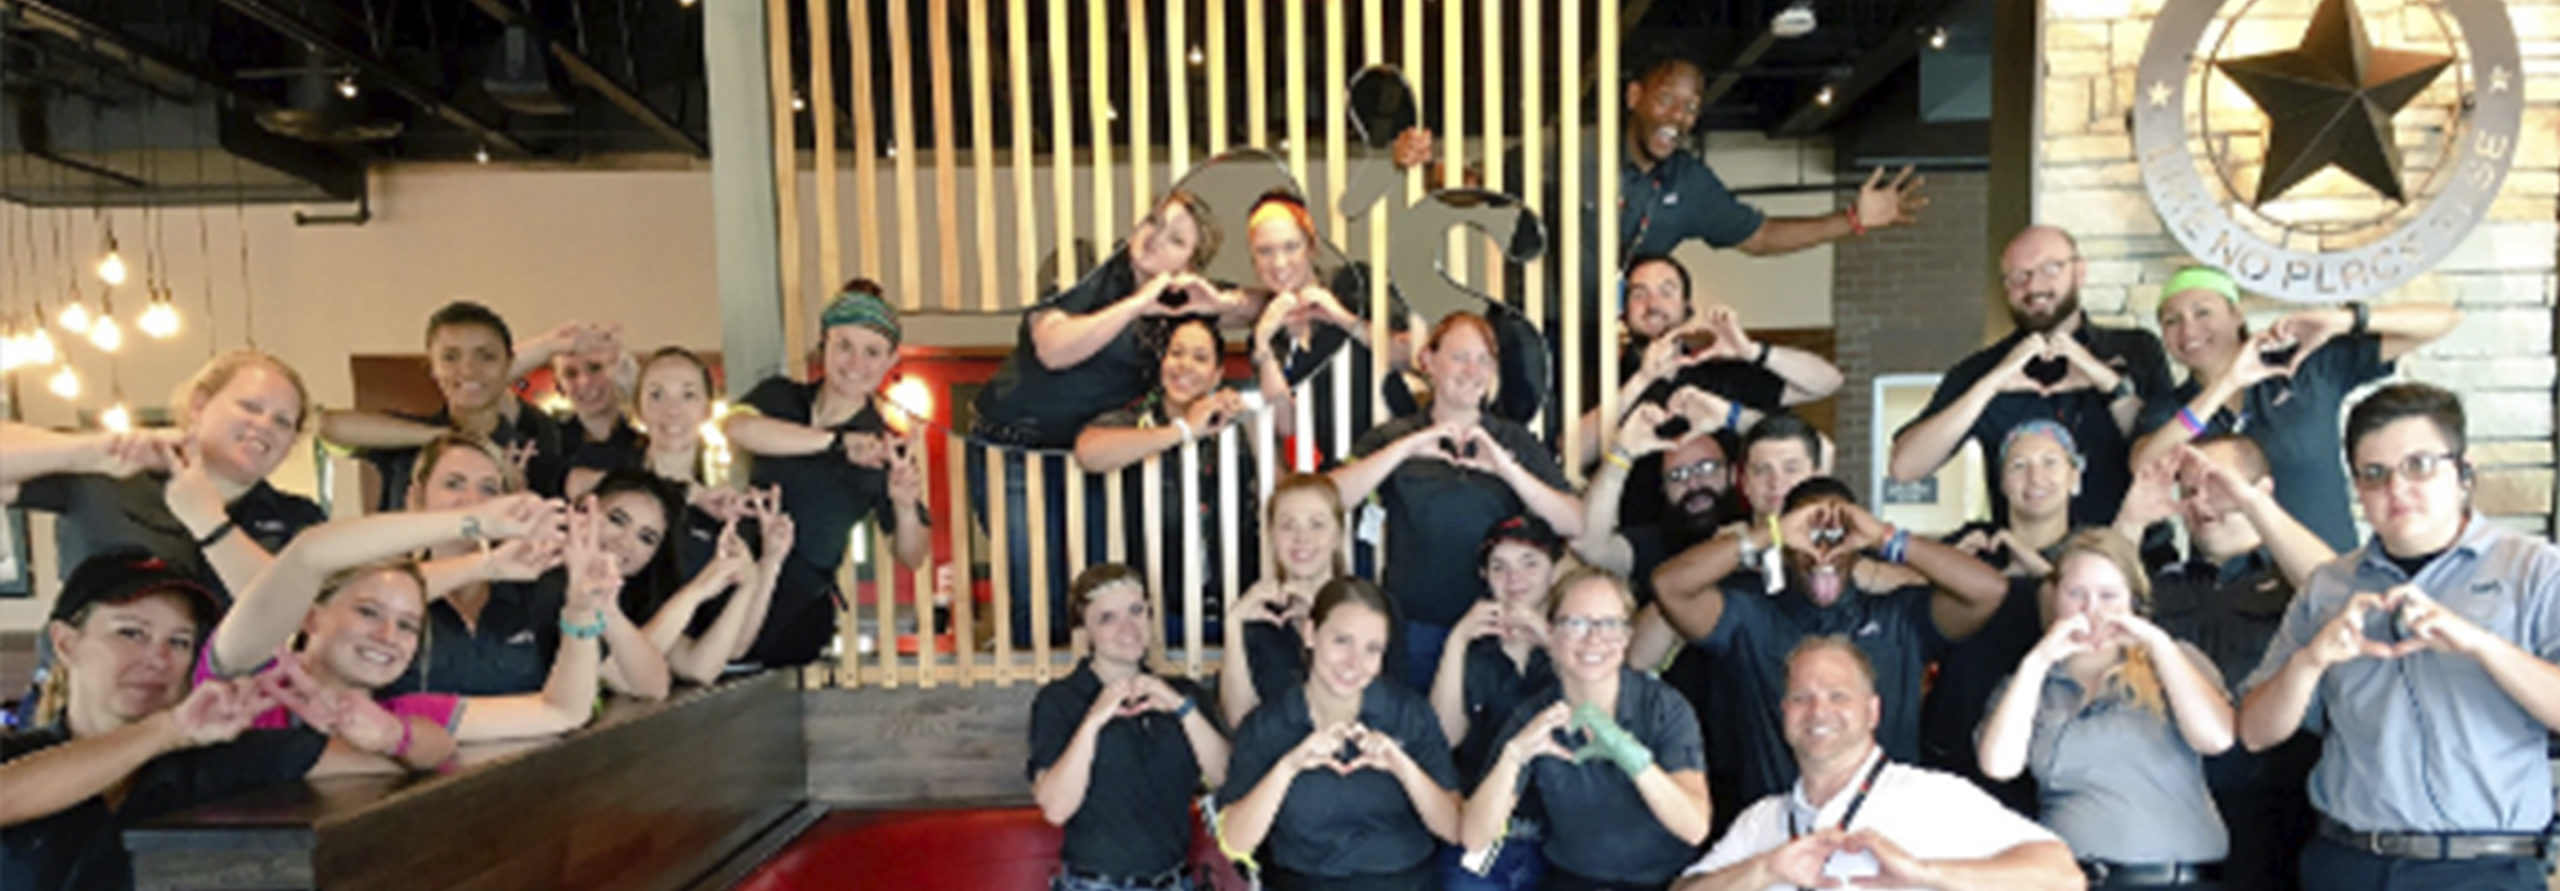 Brinker love 1 300x104 - How Brinker International serves up whole-person well-being to team members at Chili’s and Maggiano’s